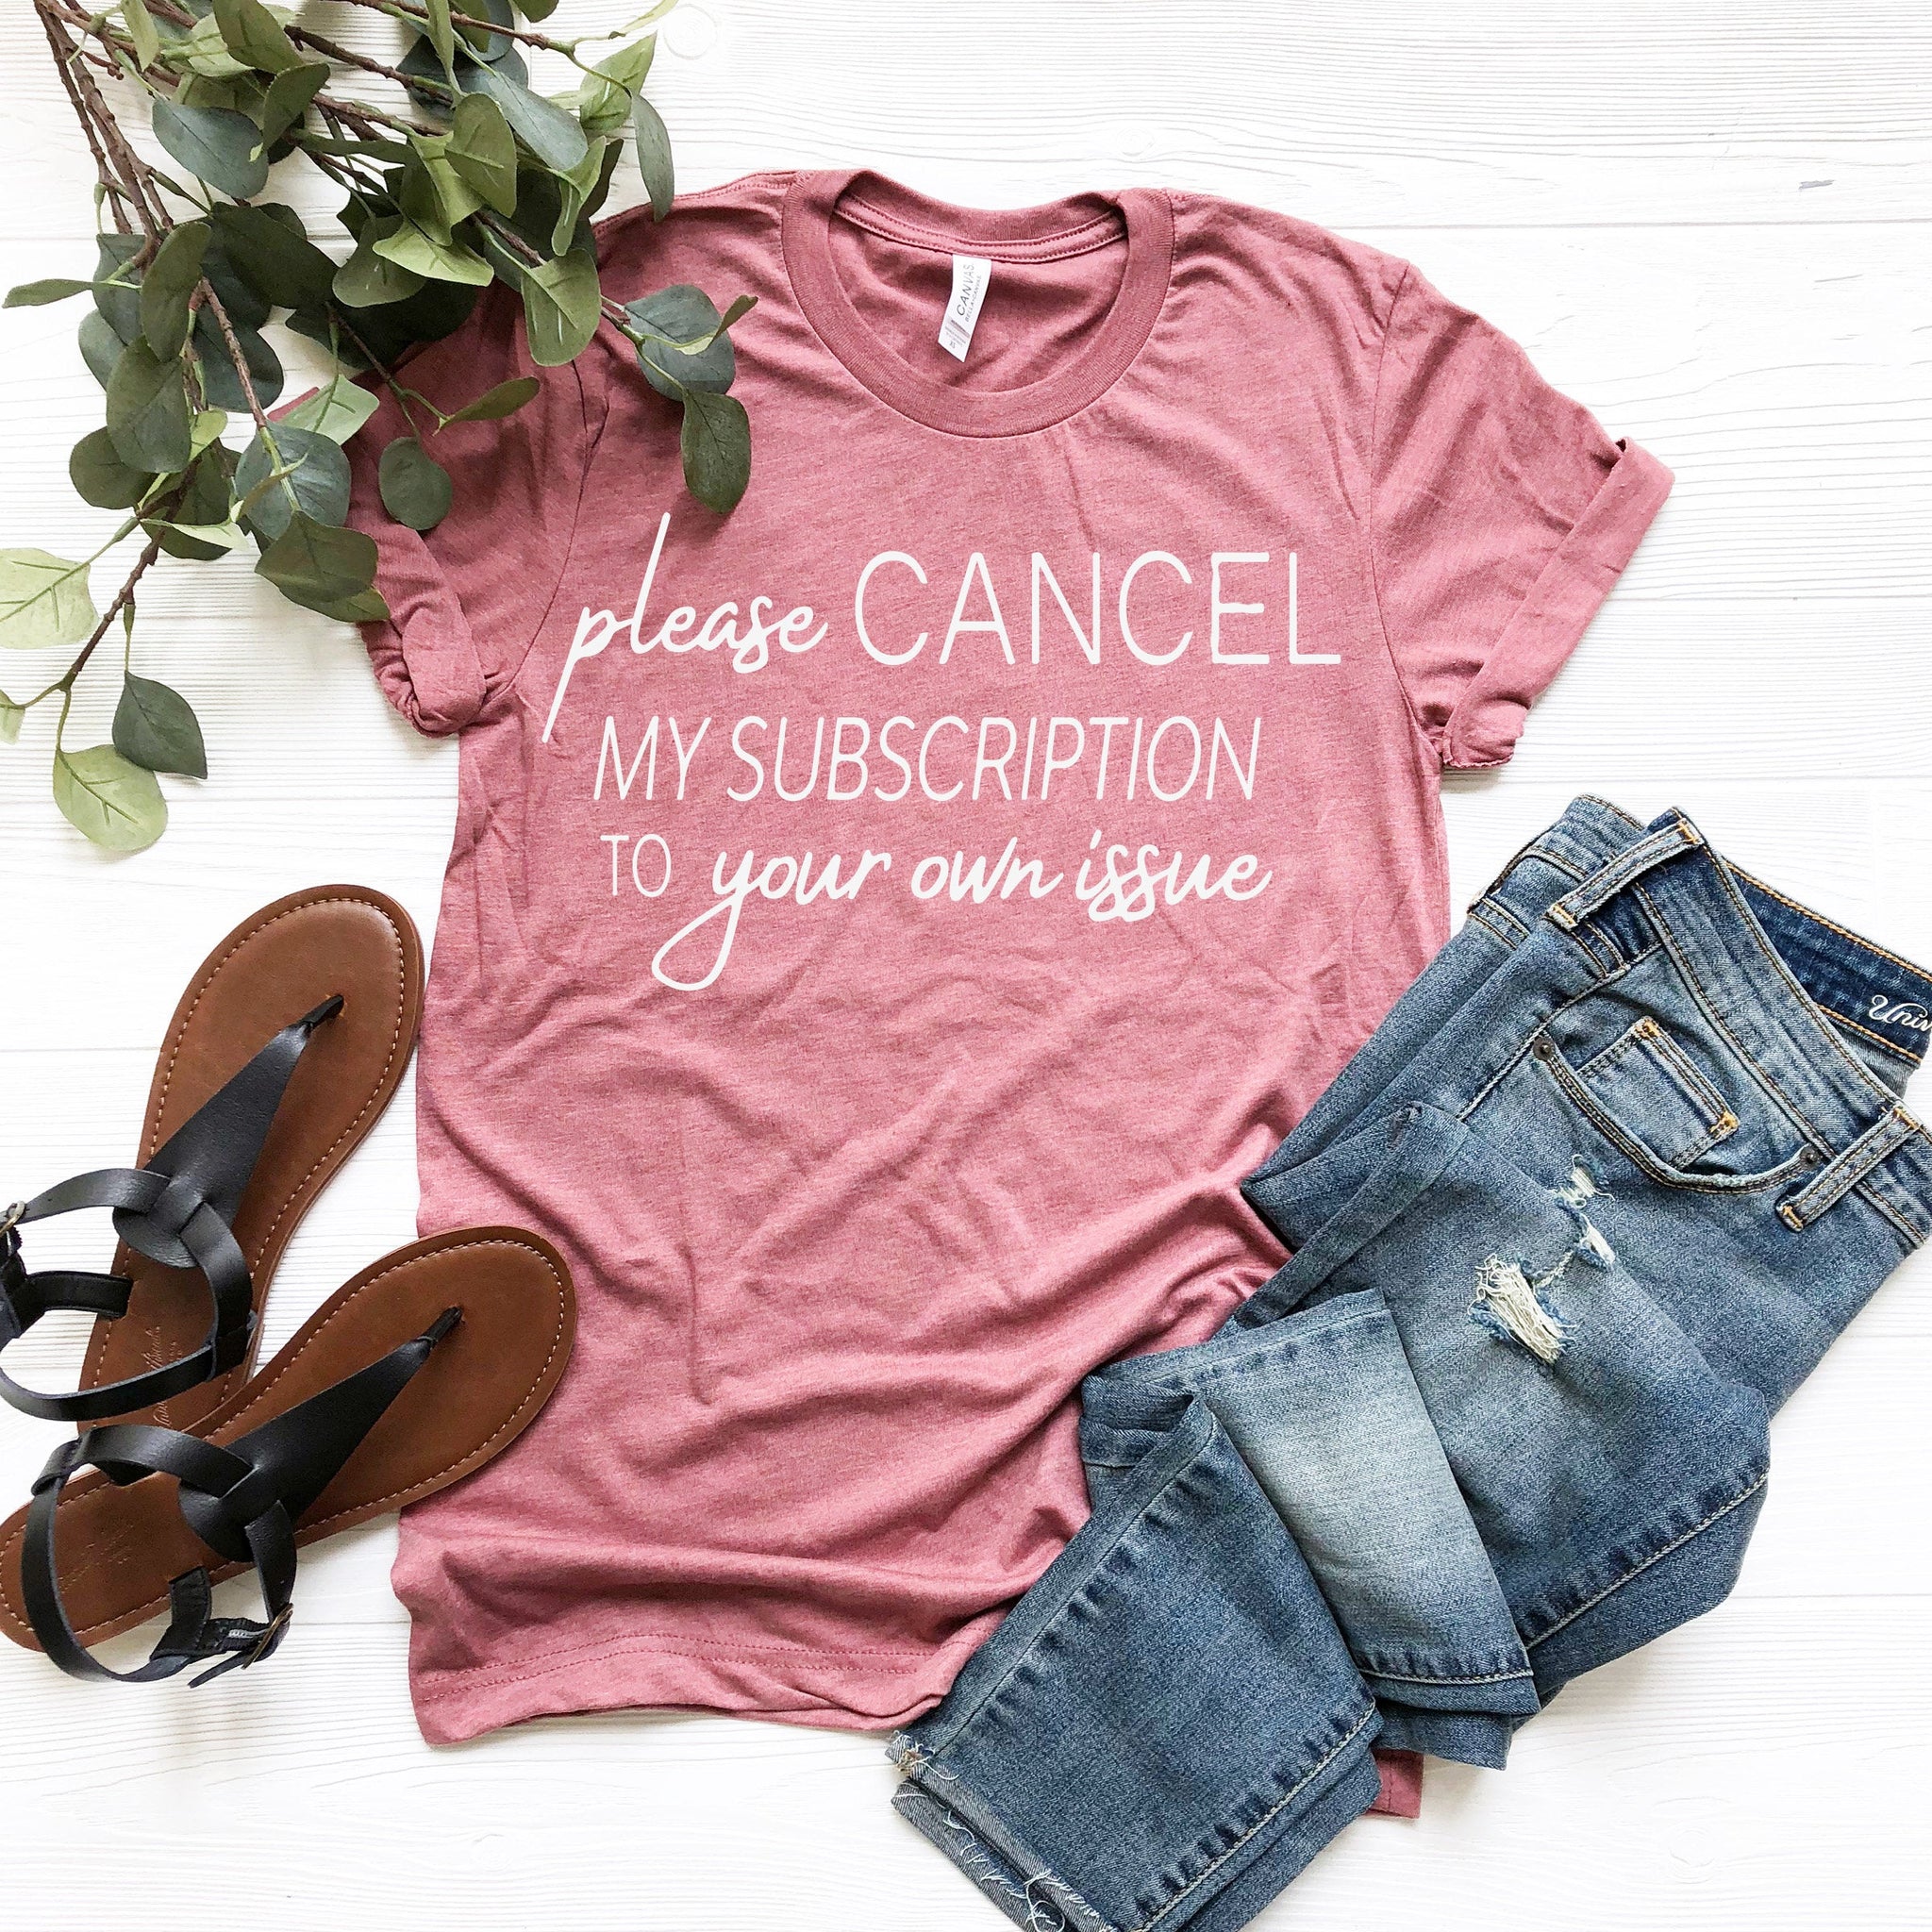 Cancel My Subscription to Your Issues, Funny Tshirt Sayings, Funny